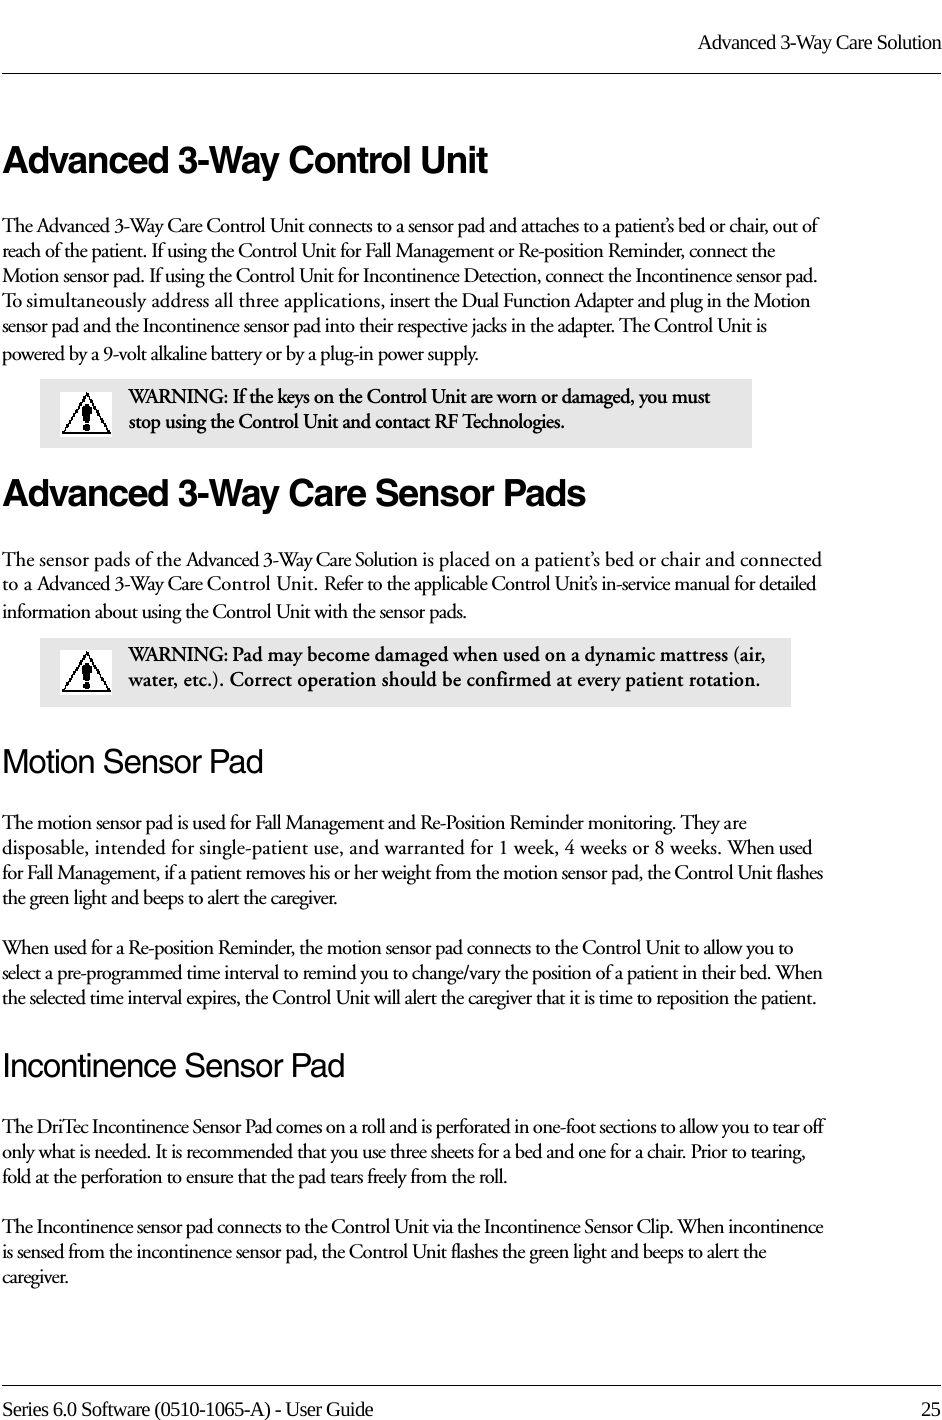 Series 6.0 Software (0510-1065-A) - User Guide  25Advanced 3-Way Care SolutionAdvanced 3-Way Control UnitThe Advanced 3-Way Care Control Unit connects to a sensor pad and attaches to a patient’s bed or chair, out of reach of the patient. If using the Control Unit for Fall Management or Re-position Reminder, connect the Motion sensor pad. If using the Control Unit for Incontinence Detection, connect the Incontinence sensor pad. To simultaneously address all three applications, insert the Dual Function Adapter and plug in the Motion sensor pad and the Incontinence sensor pad into their respective jacks in the adapter. The Control Unit is powered by a 9-volt alkaline battery or by a plug-in power supply.Advanced 3-Way Care Sensor PadsThe sensor pads of the Advanced 3-Way Care Solution is placed on a patient’s bed or chair and connected to a Advanced 3-Way Care Control Unit. Refer to the applicable Control Unit’s in-service manual for detailed information about using the Control Unit with the sensor pads. Motion Sensor PadThe motion sensor pad is used for Fall Management and Re-Position Reminder monitoring. They are disposable, intended for single-patient use, and warranted for 1 week, 4 weeks or 8 weeks. When used for Fall Management, if a patient removes his or her weight from the motion sensor pad, the Control Unit flashes the green light and beeps to alert the caregiver. When used for a Re-position Reminder, the motion sensor pad connects to the Control Unit to allow you to select a pre-programmed time interval to remind you to change/vary the position of a patient in their bed. When the selected time interval expires, the Control Unit will alert the caregiver that it is time to reposition the patient.Incontinence Sensor PadThe DriTec Incontinence Sensor Pad comes on a roll and is perforated in one-foot sections to allow you to tear off only what is needed. It is recommended that you use three sheets for a bed and one for a chair. Prior to tearing, fold at the perforation to ensure that the pad tears freely from the roll.The Incontinence sensor pad connects to the Control Unit via the Incontinence Sensor Clip. When incontinence is sensed from the incontinence sensor pad, the Control Unit flashes the green light and beeps to alert the caregiver.WARNING: If the keys on the Control Unit are worn or damaged, you must stop using the Control Unit and contact RF Technologies.WARNING: Pad may become damaged when used on a dynamic mattress (air, water, etc.). Correct operation should be confirmed at every patient rotation.